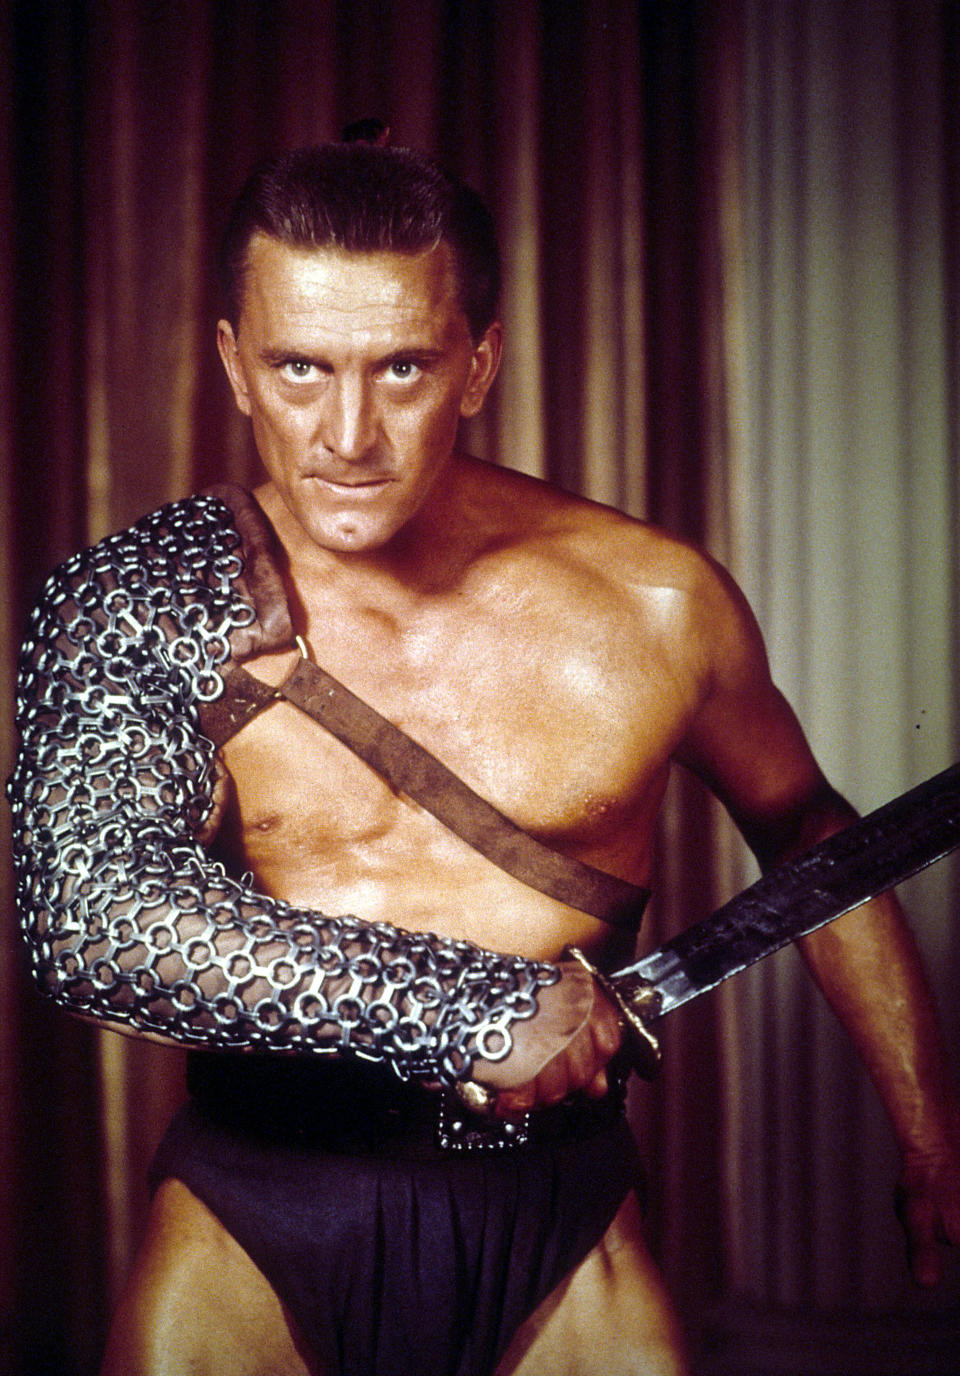 Kirk Douglas portrays the slave Spartacus, ready to fight in a scene from the 1960 film "Spartacus." (Photo by Universal Pictures/Getty Images)